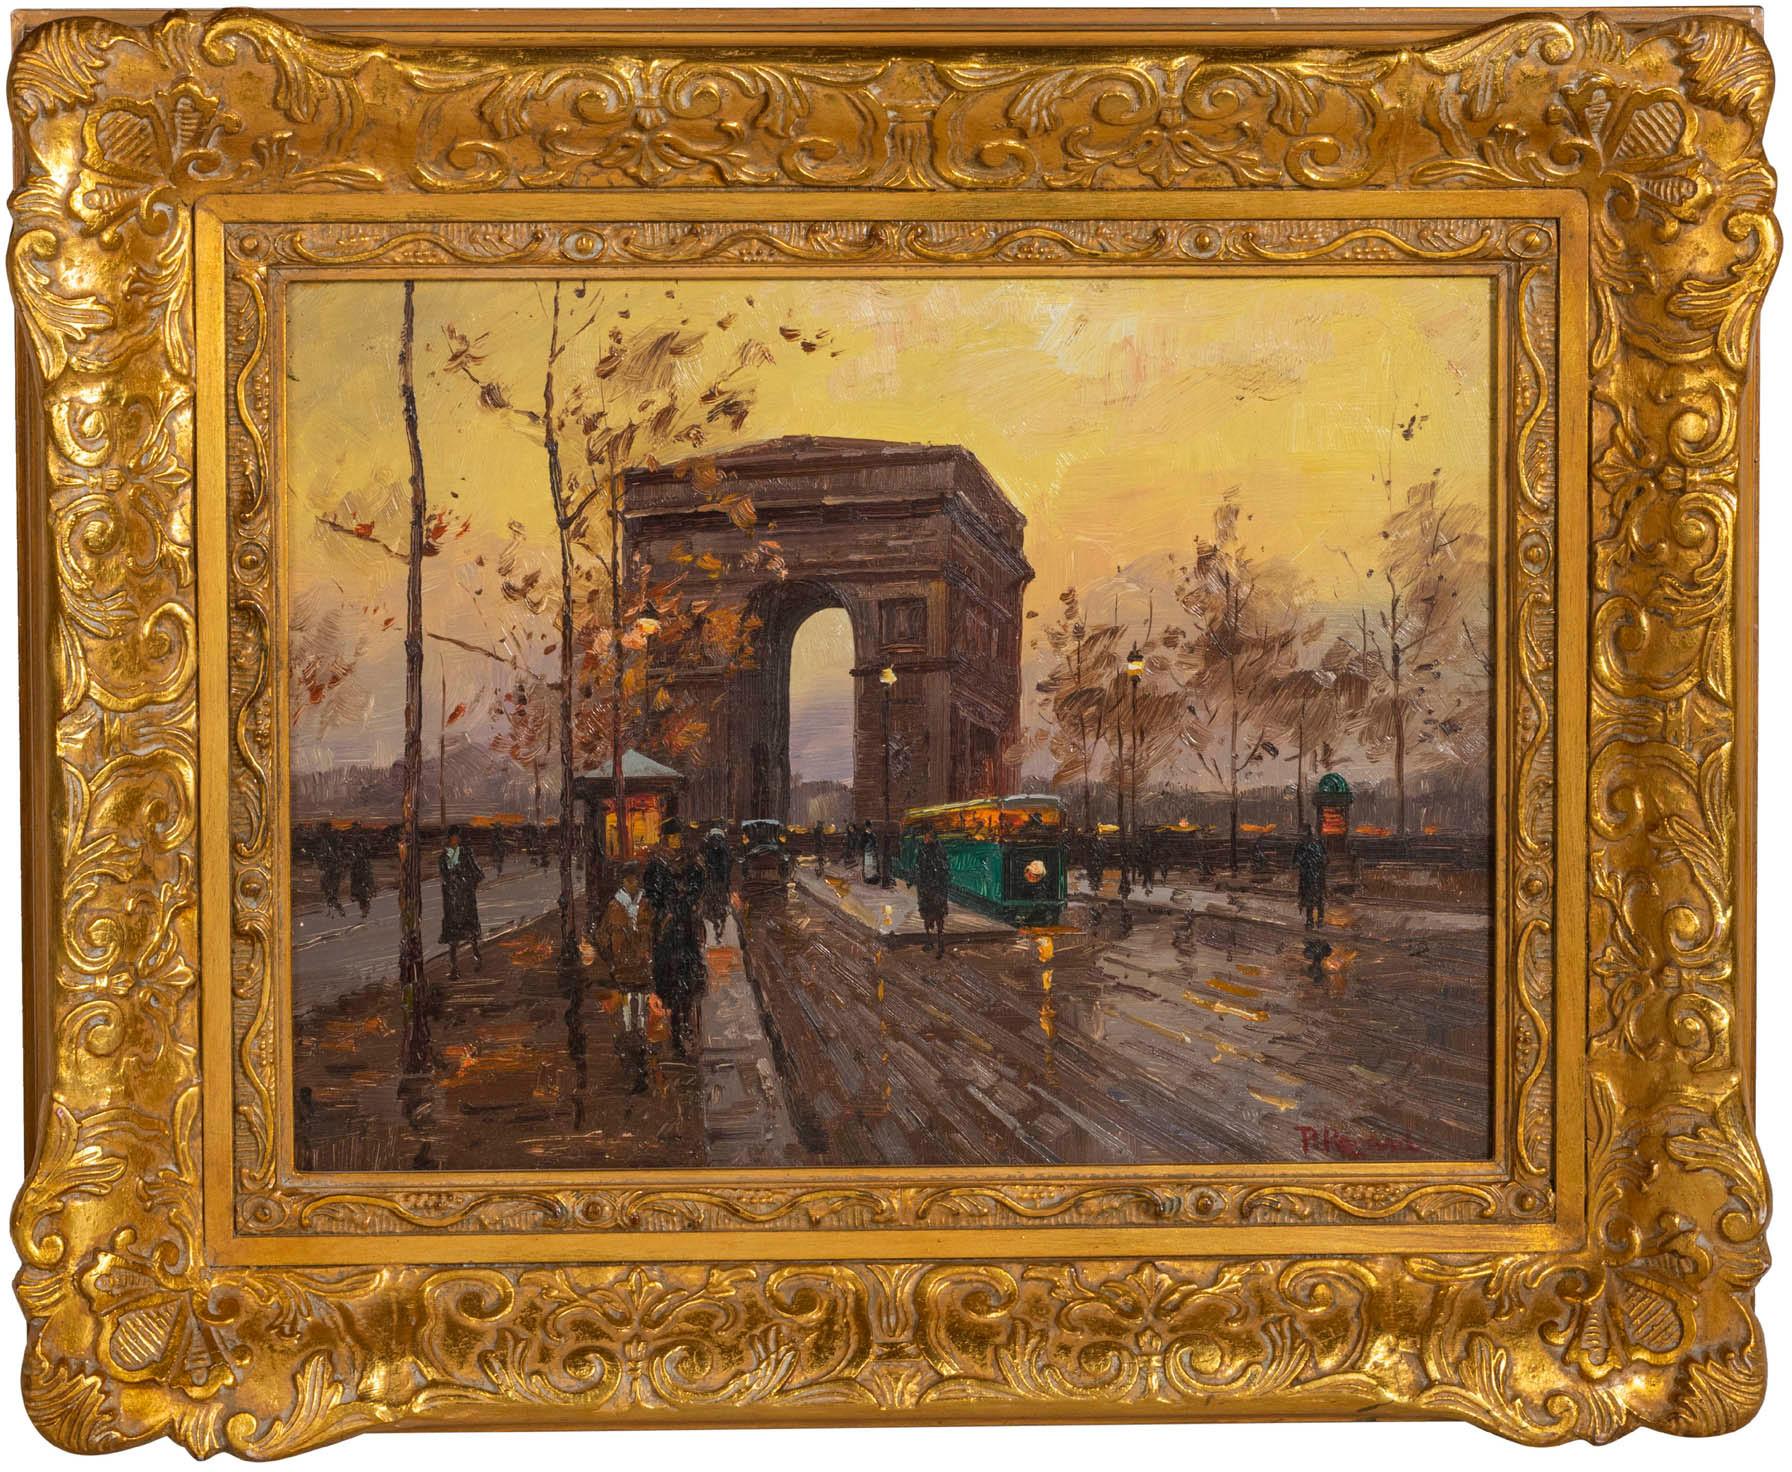 Paul Renard (1941-1997)
Champs-Élysées
Signed P Renard (lower right)
Oil on panel
Size with frame:
Height 18.25 in. (46.35 cm.)
Width 22.25 in. (56.51 cm.)
Canvas sight size
Height 11.5 in. (29.21 cm.)
Width 15.37 in. (39.05 cm.)
 